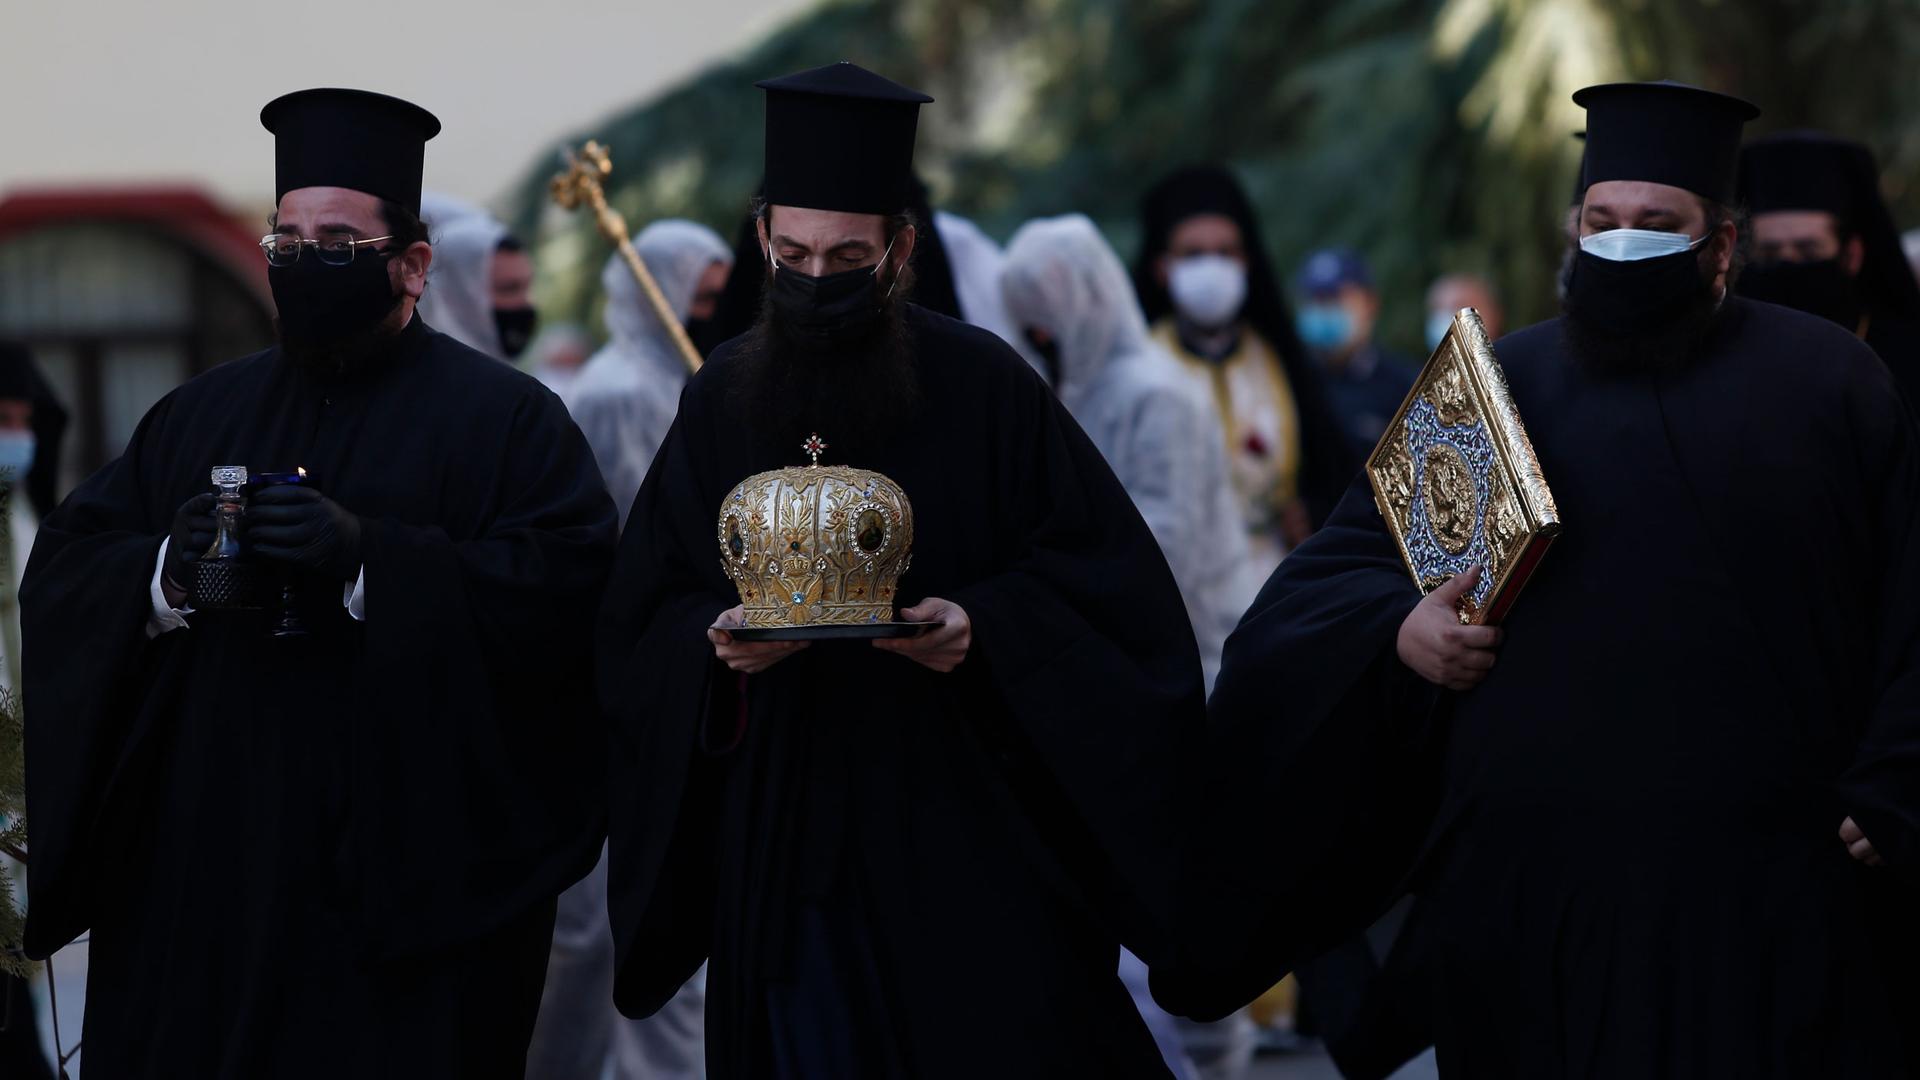 Three priests are shown wearing face masks and dressed in traditional black Greek Orthodox attire while carrying religious objects.